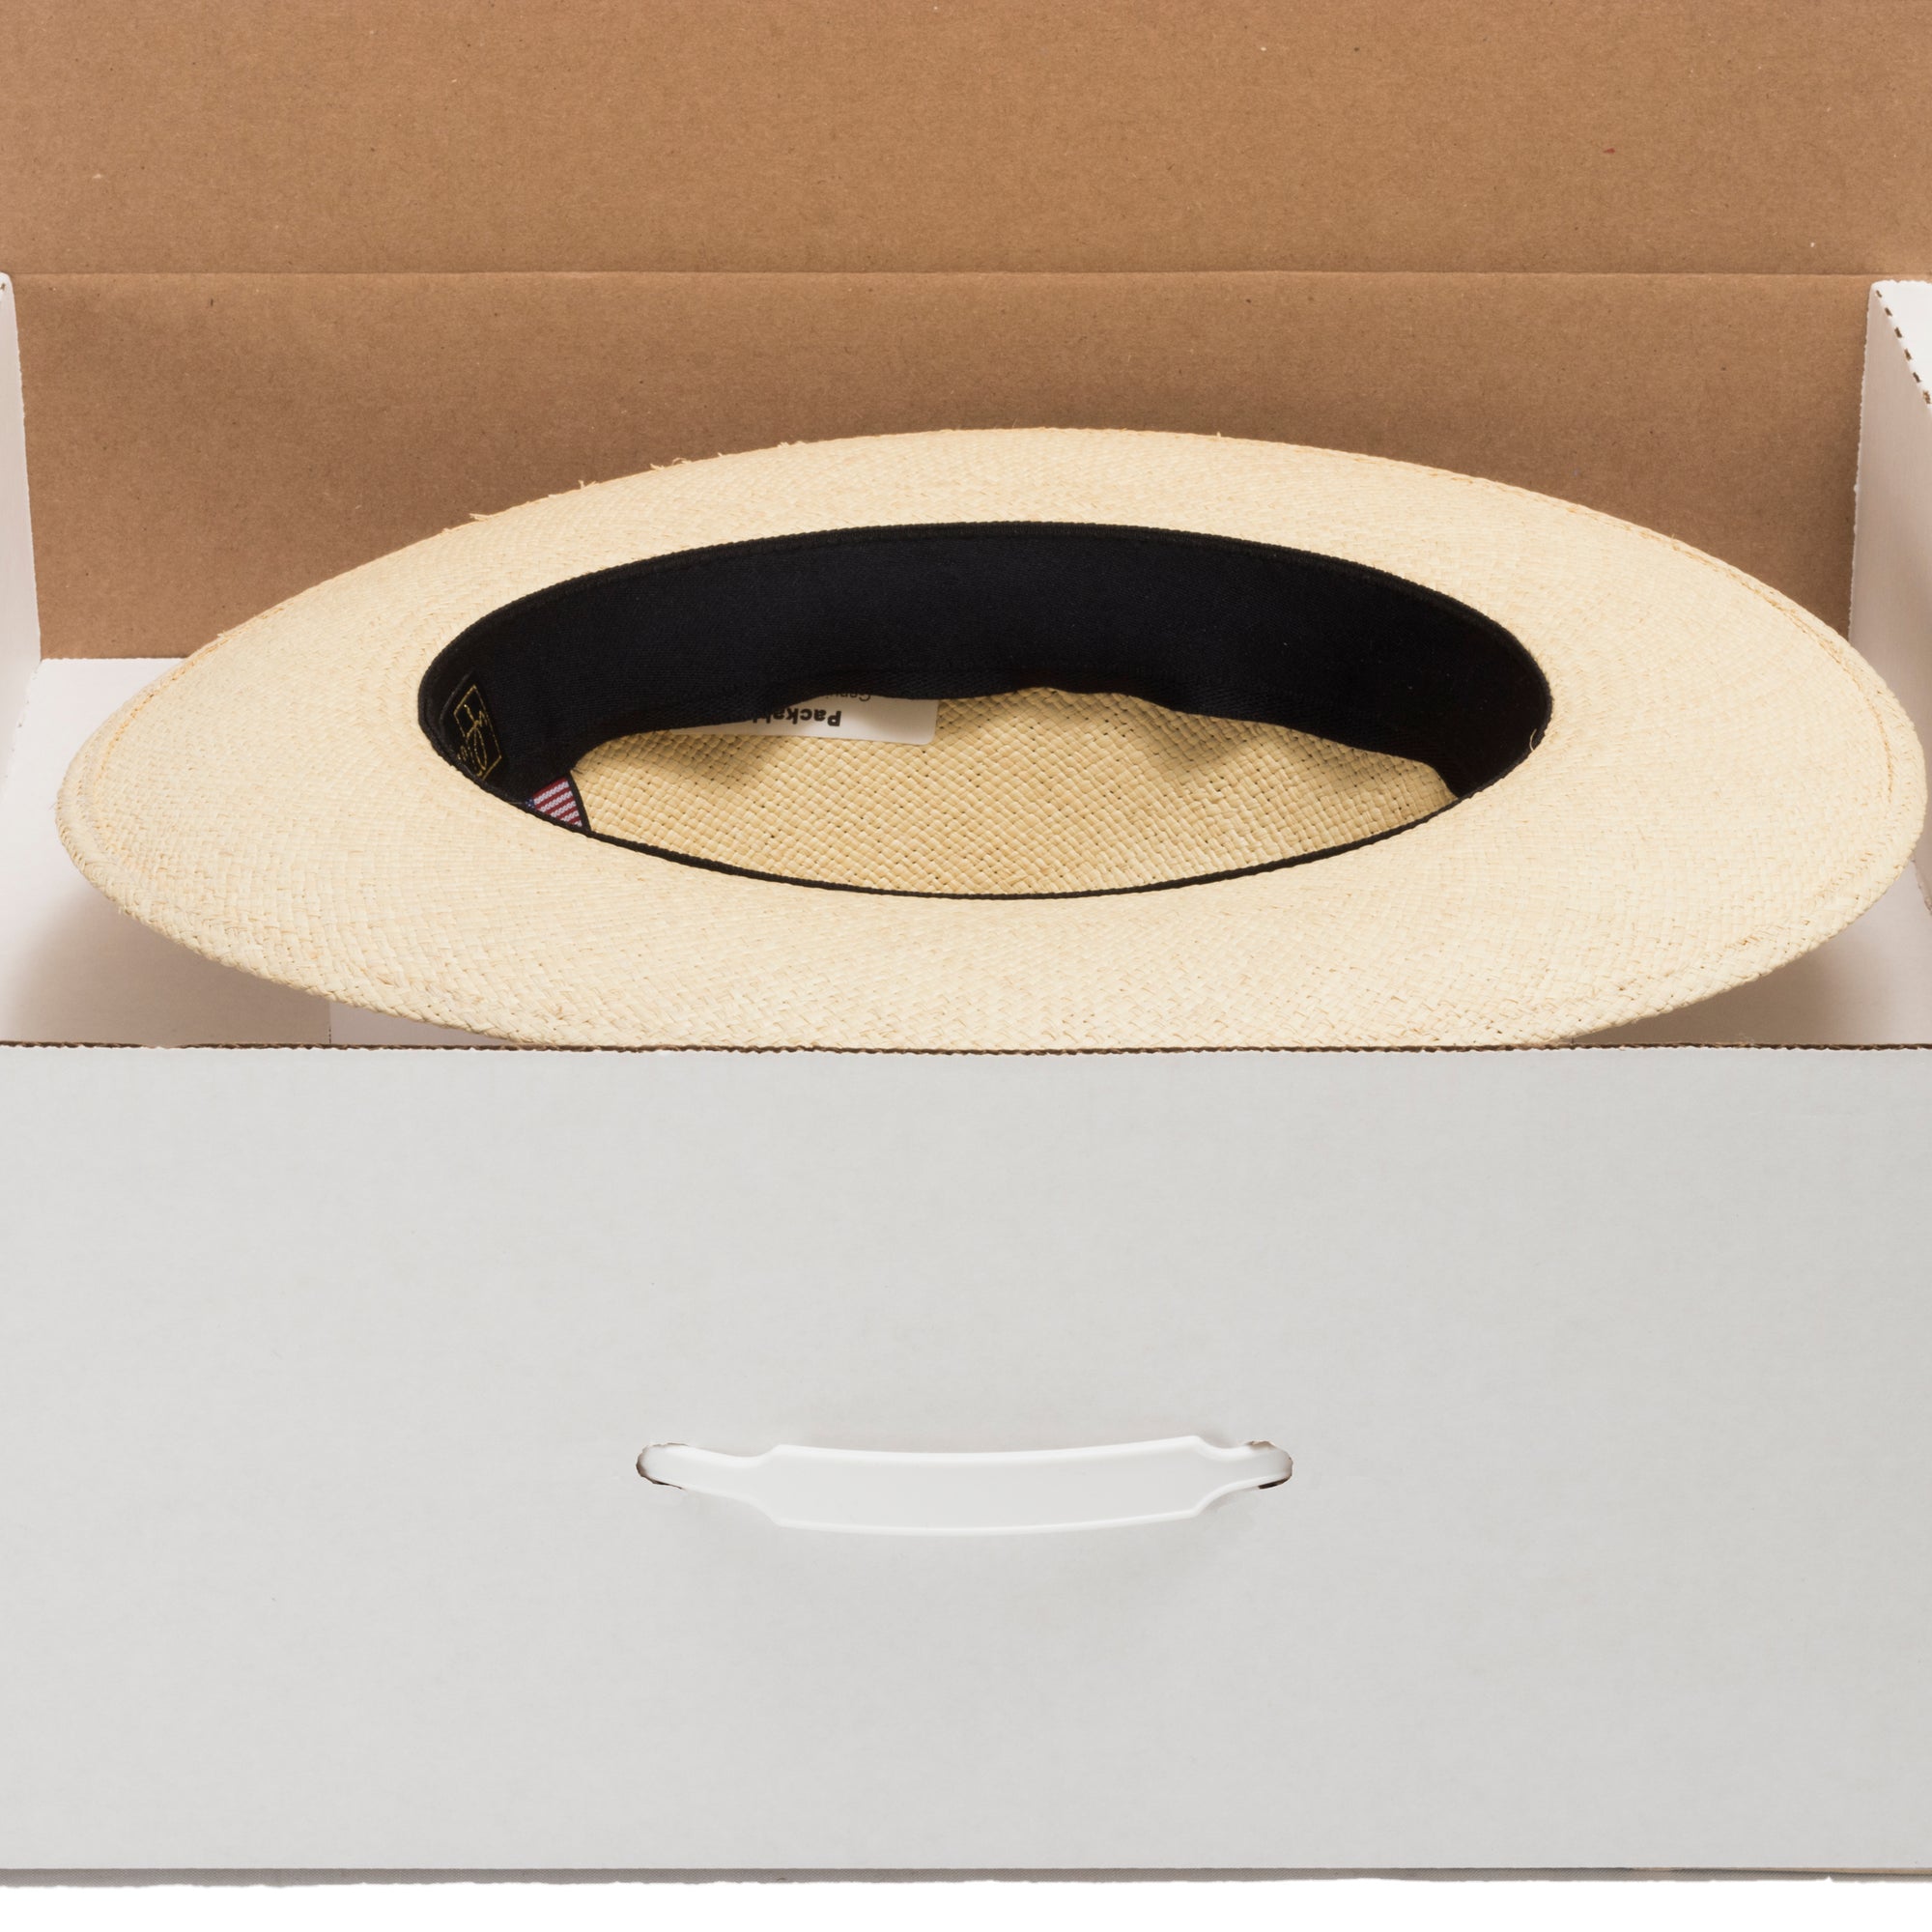  Genuine Panama Hats Hat Box for Traveling, Storing and Gifting  (5 Pack - No Design) : Clothing, Shoes & Jewelry